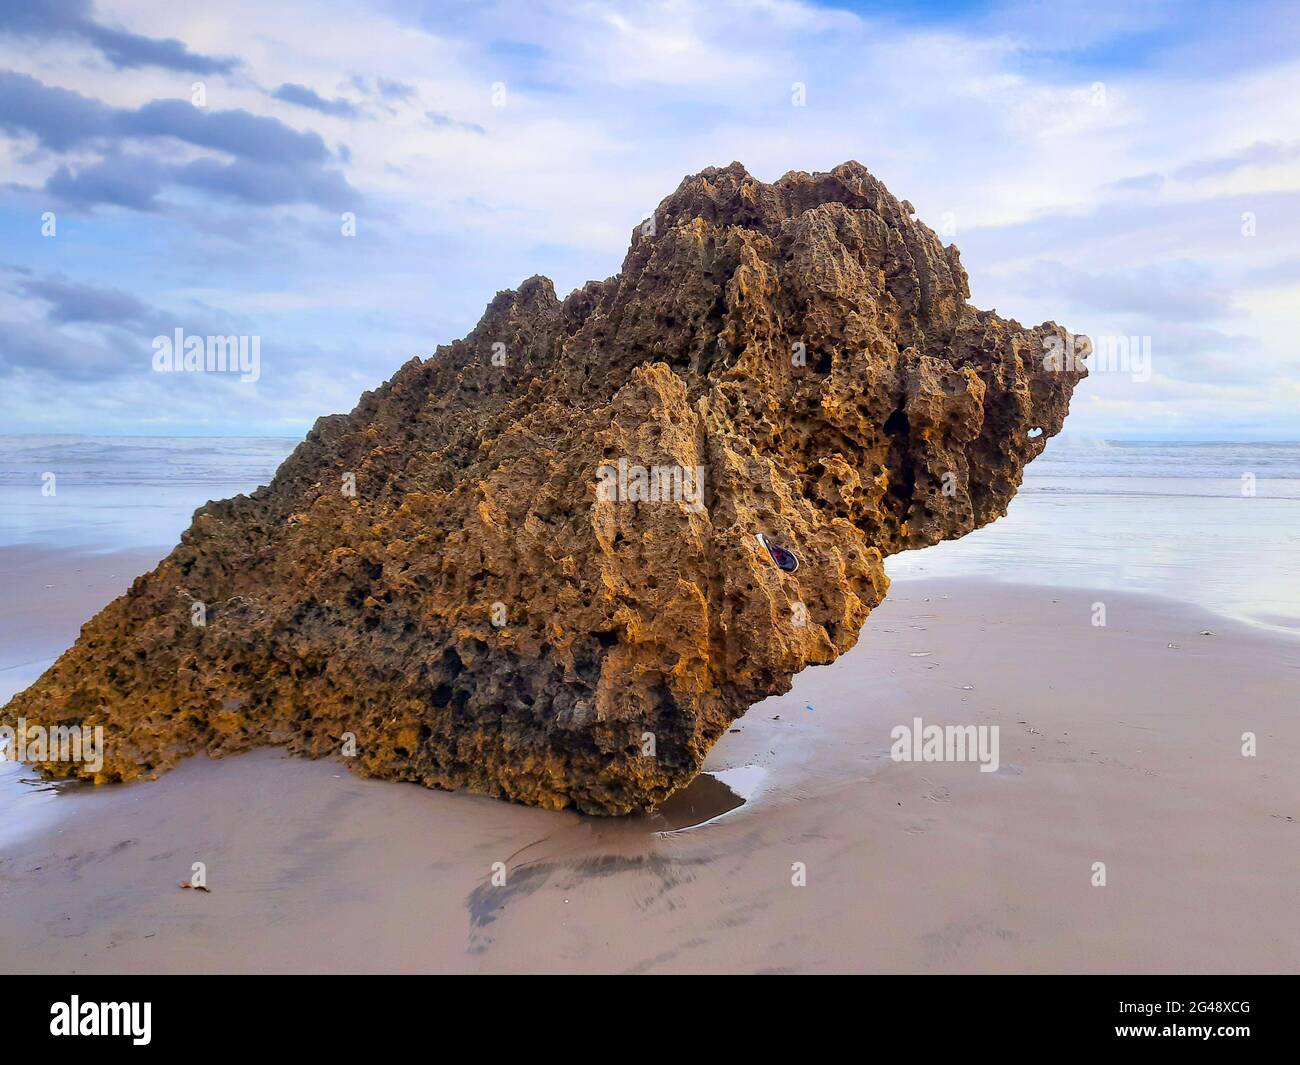 Single rock formation on a sand beach eroded to a sitting bird in profile view. Stock Photo